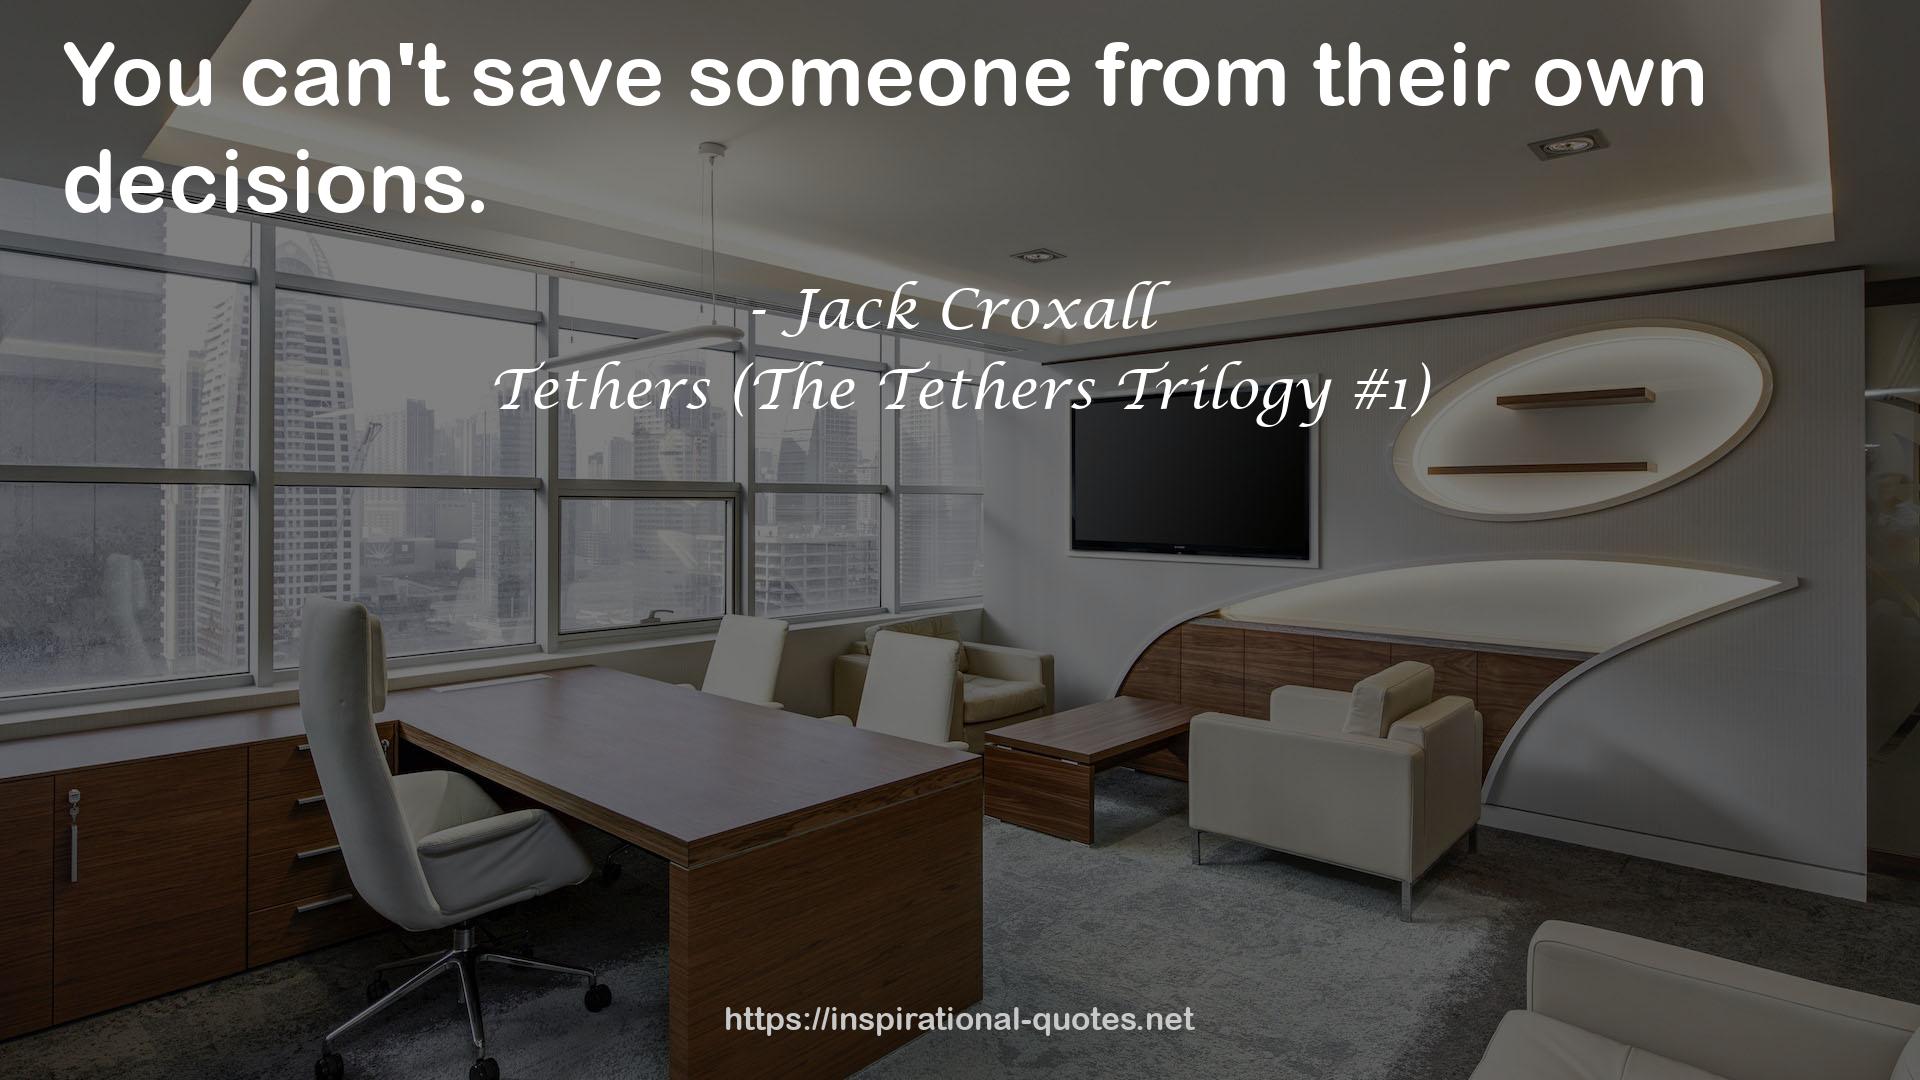 Tethers (The Tethers Trilogy #1) QUOTES